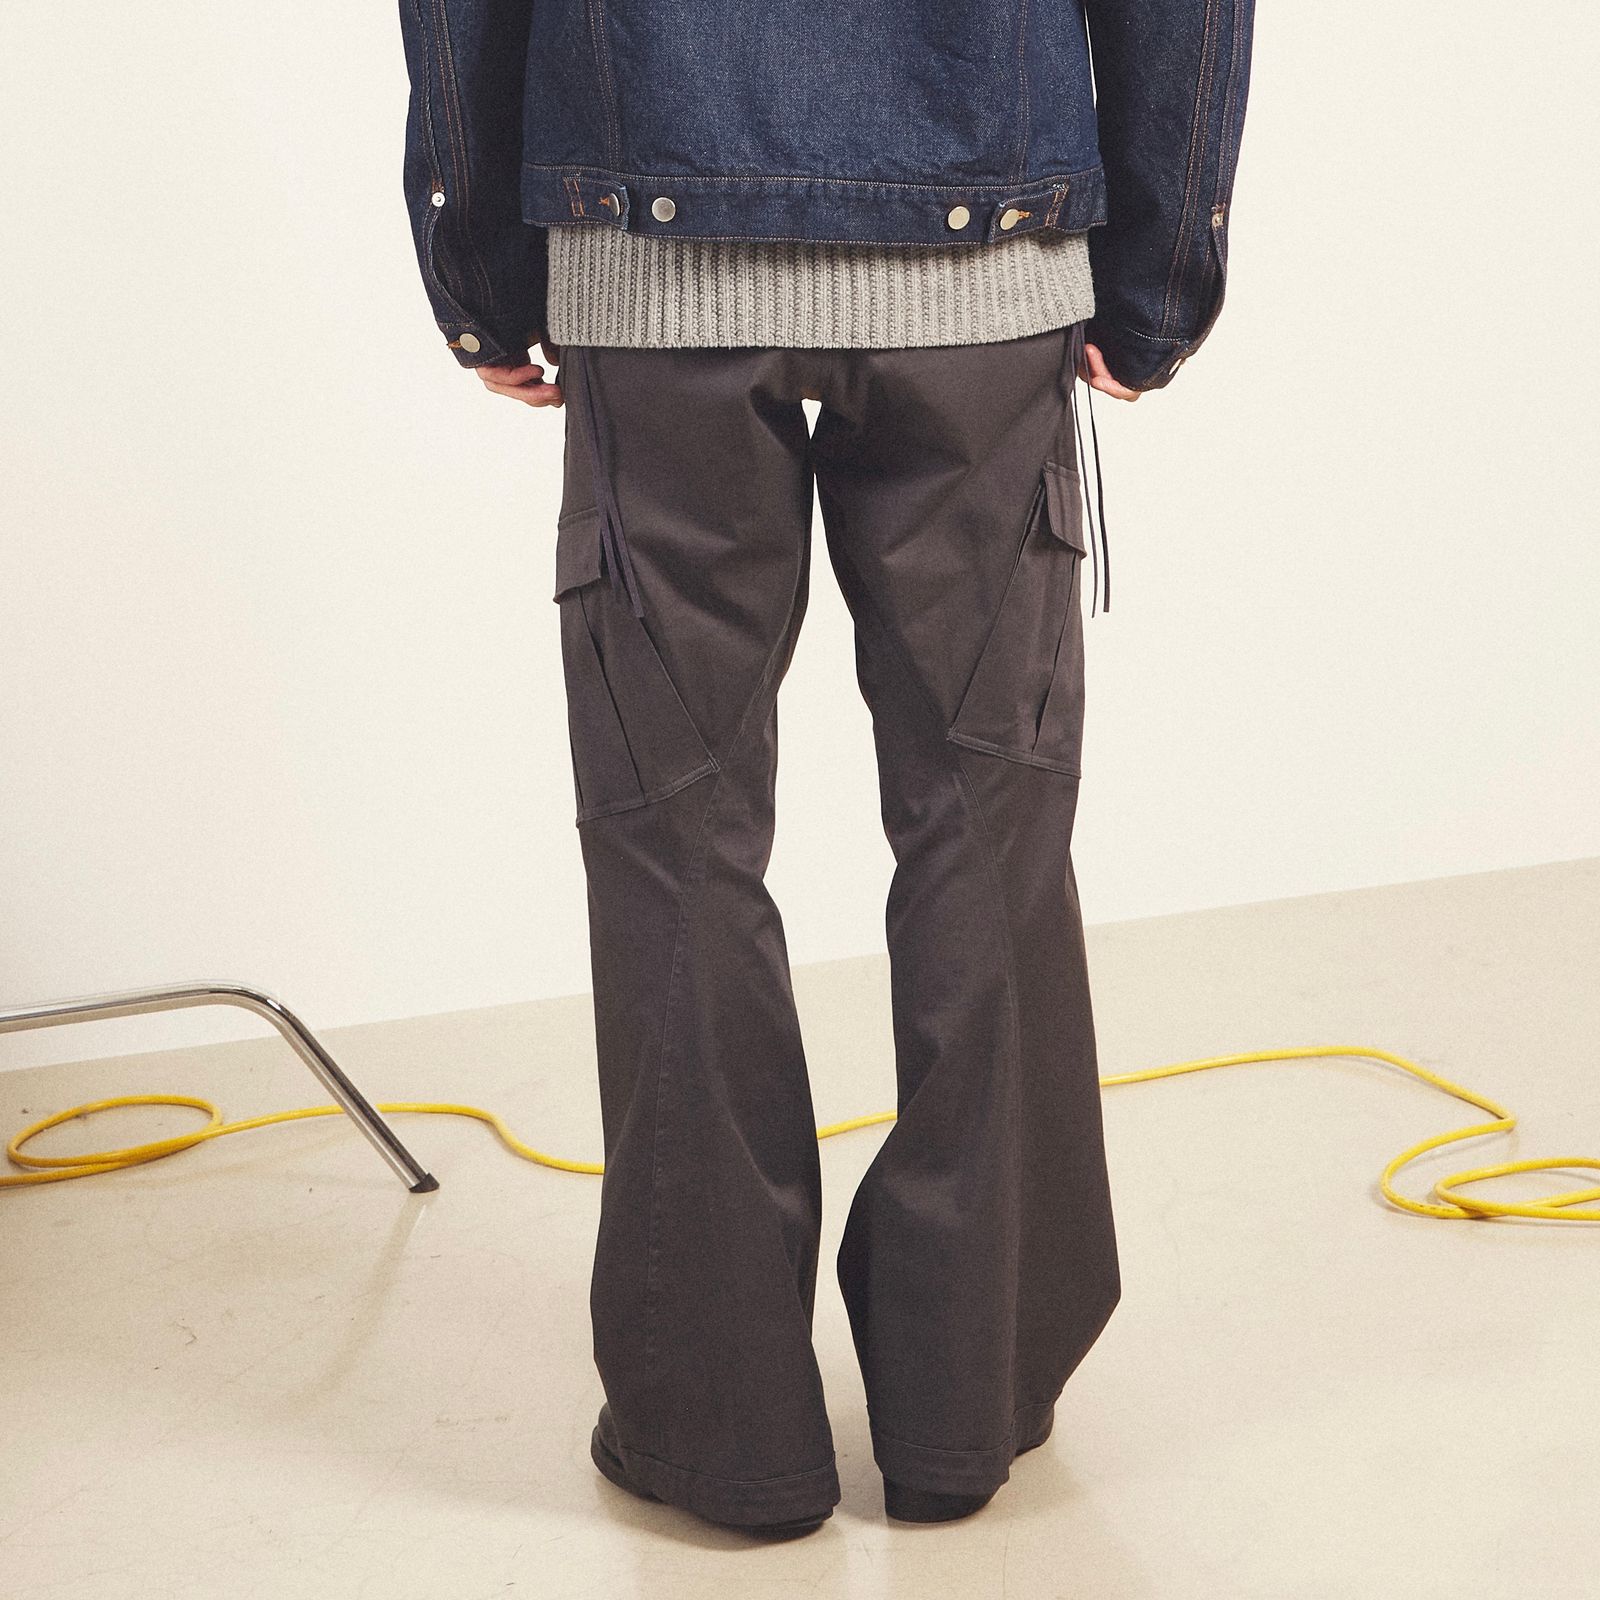 NVRFRGT - 【残りわずか】3D Twisted Cargo Pants | ACRMTSM ONLINE STORE